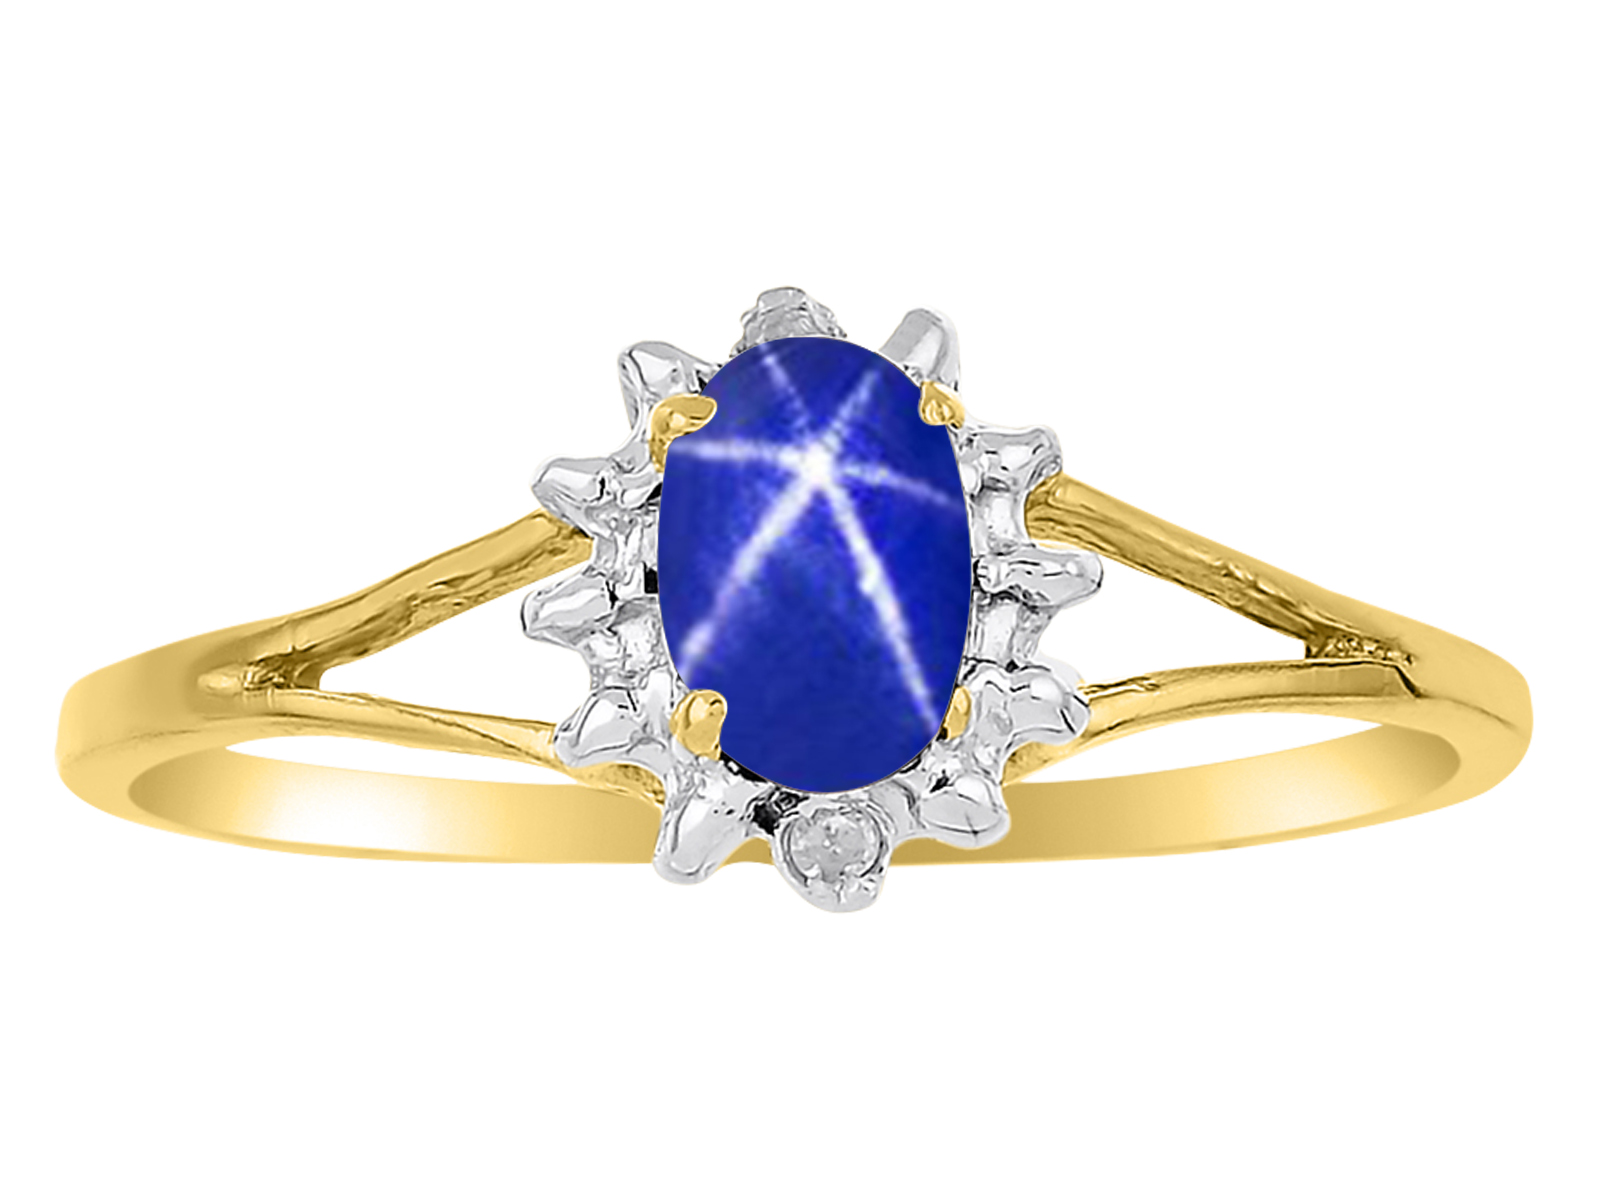 Details about  / Natural Blue Sapphire Gemstone Daimond Woman Jewelry 925 Sterling Silver Ring